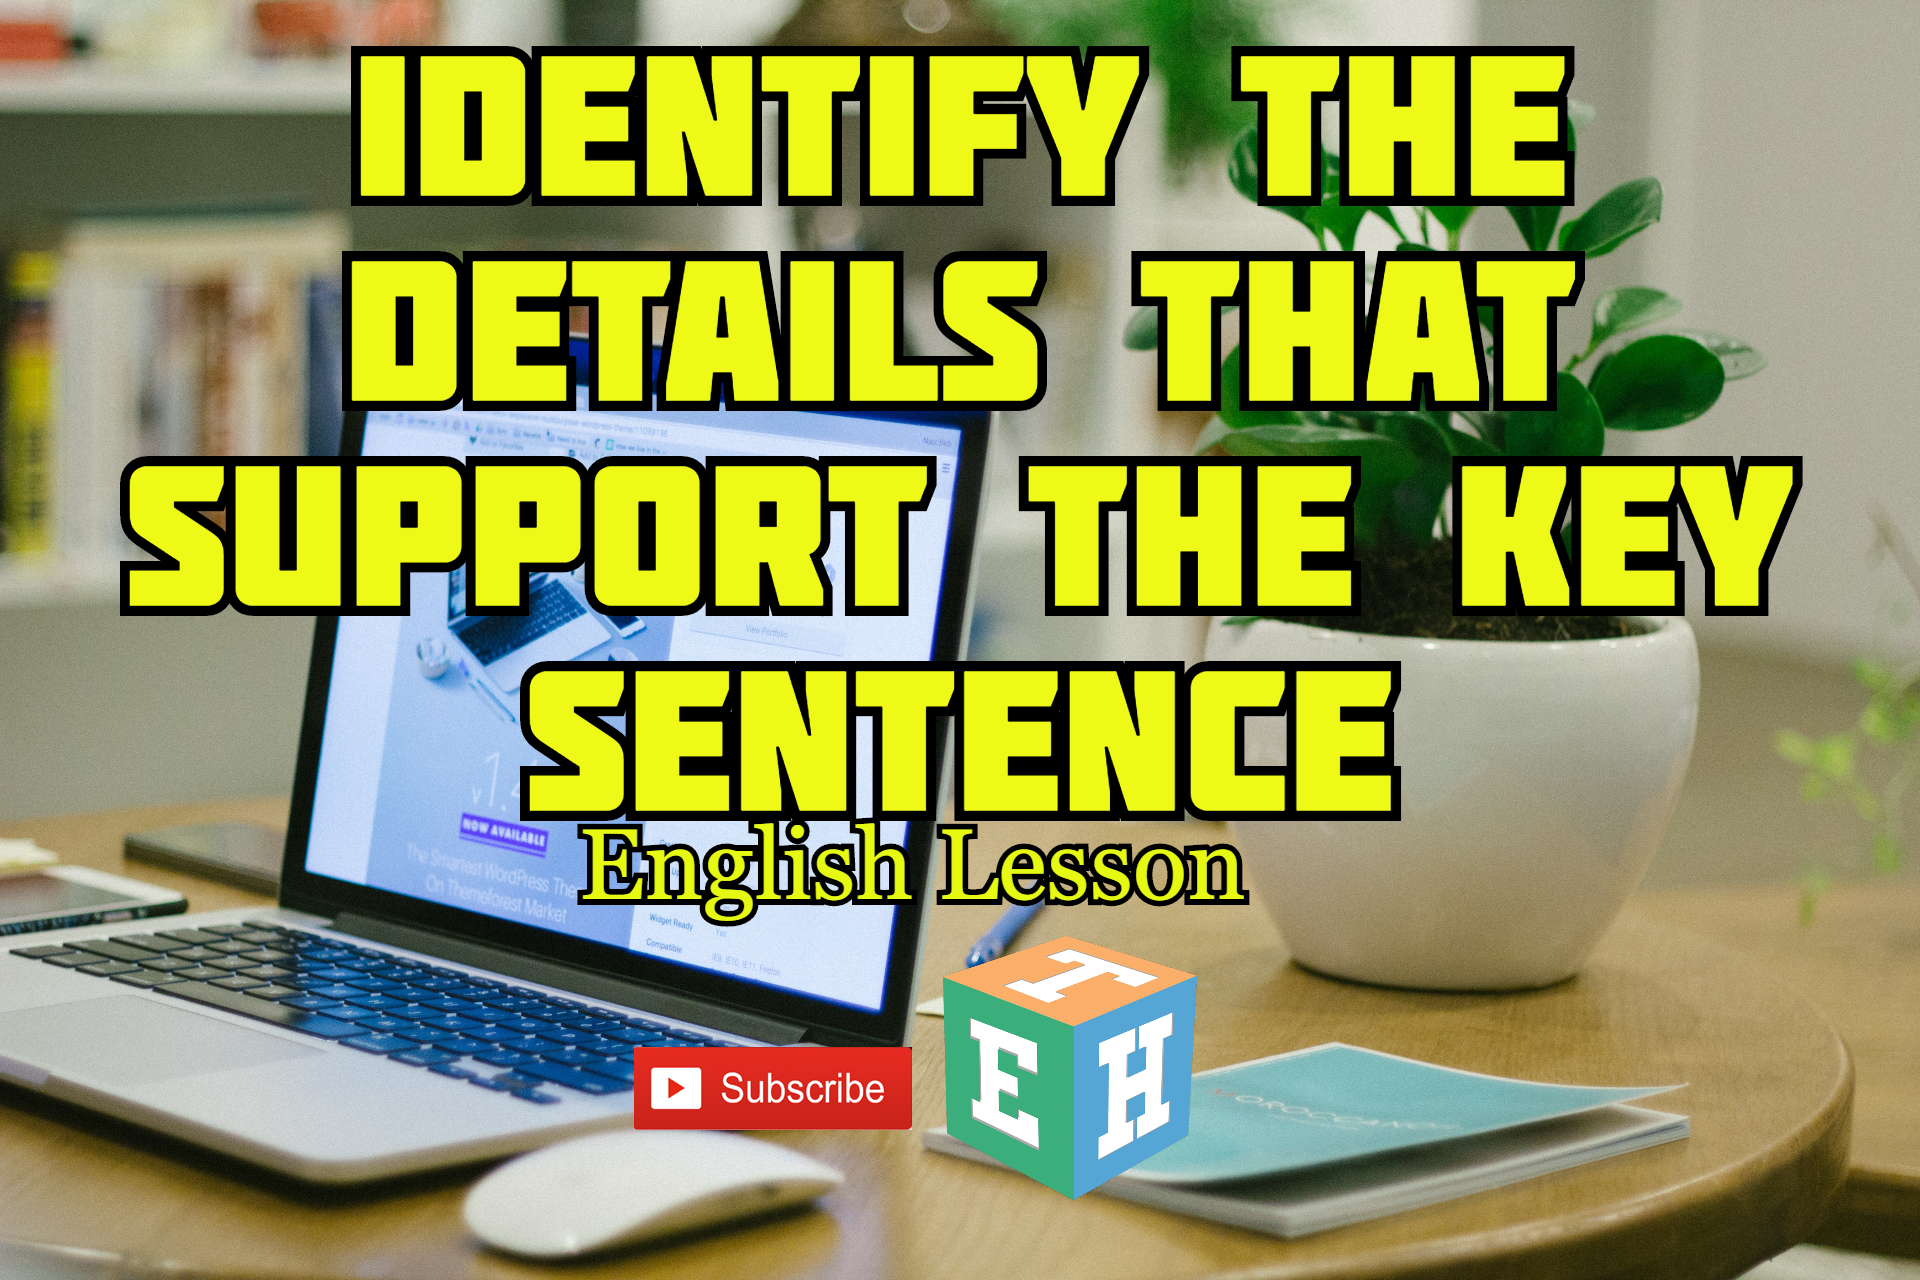 Identify the Details that Support the Key Sentence